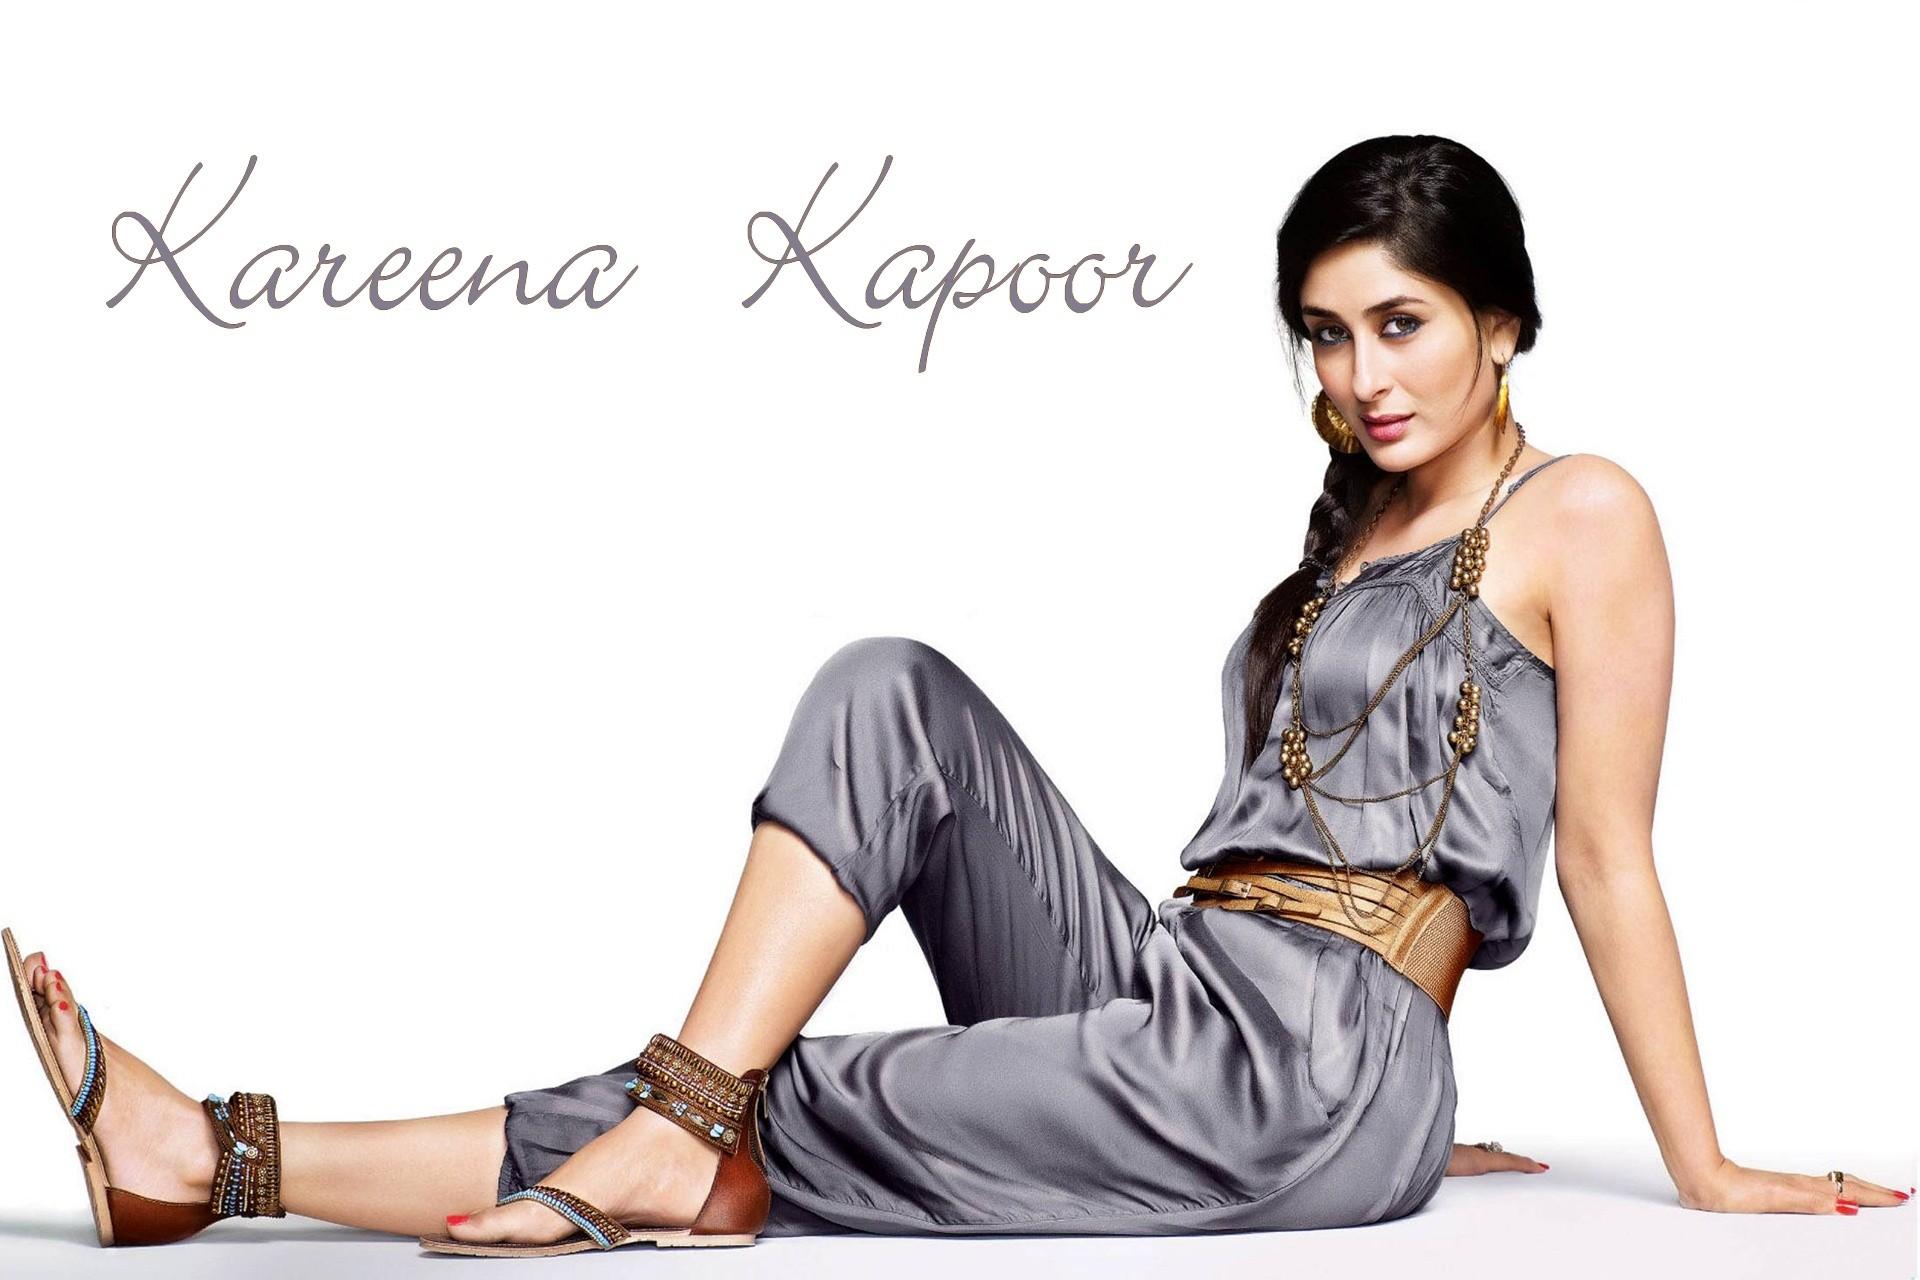 30 Kareena Kapoor Hot Pictures And Wallpapers Collections - Cinejolly